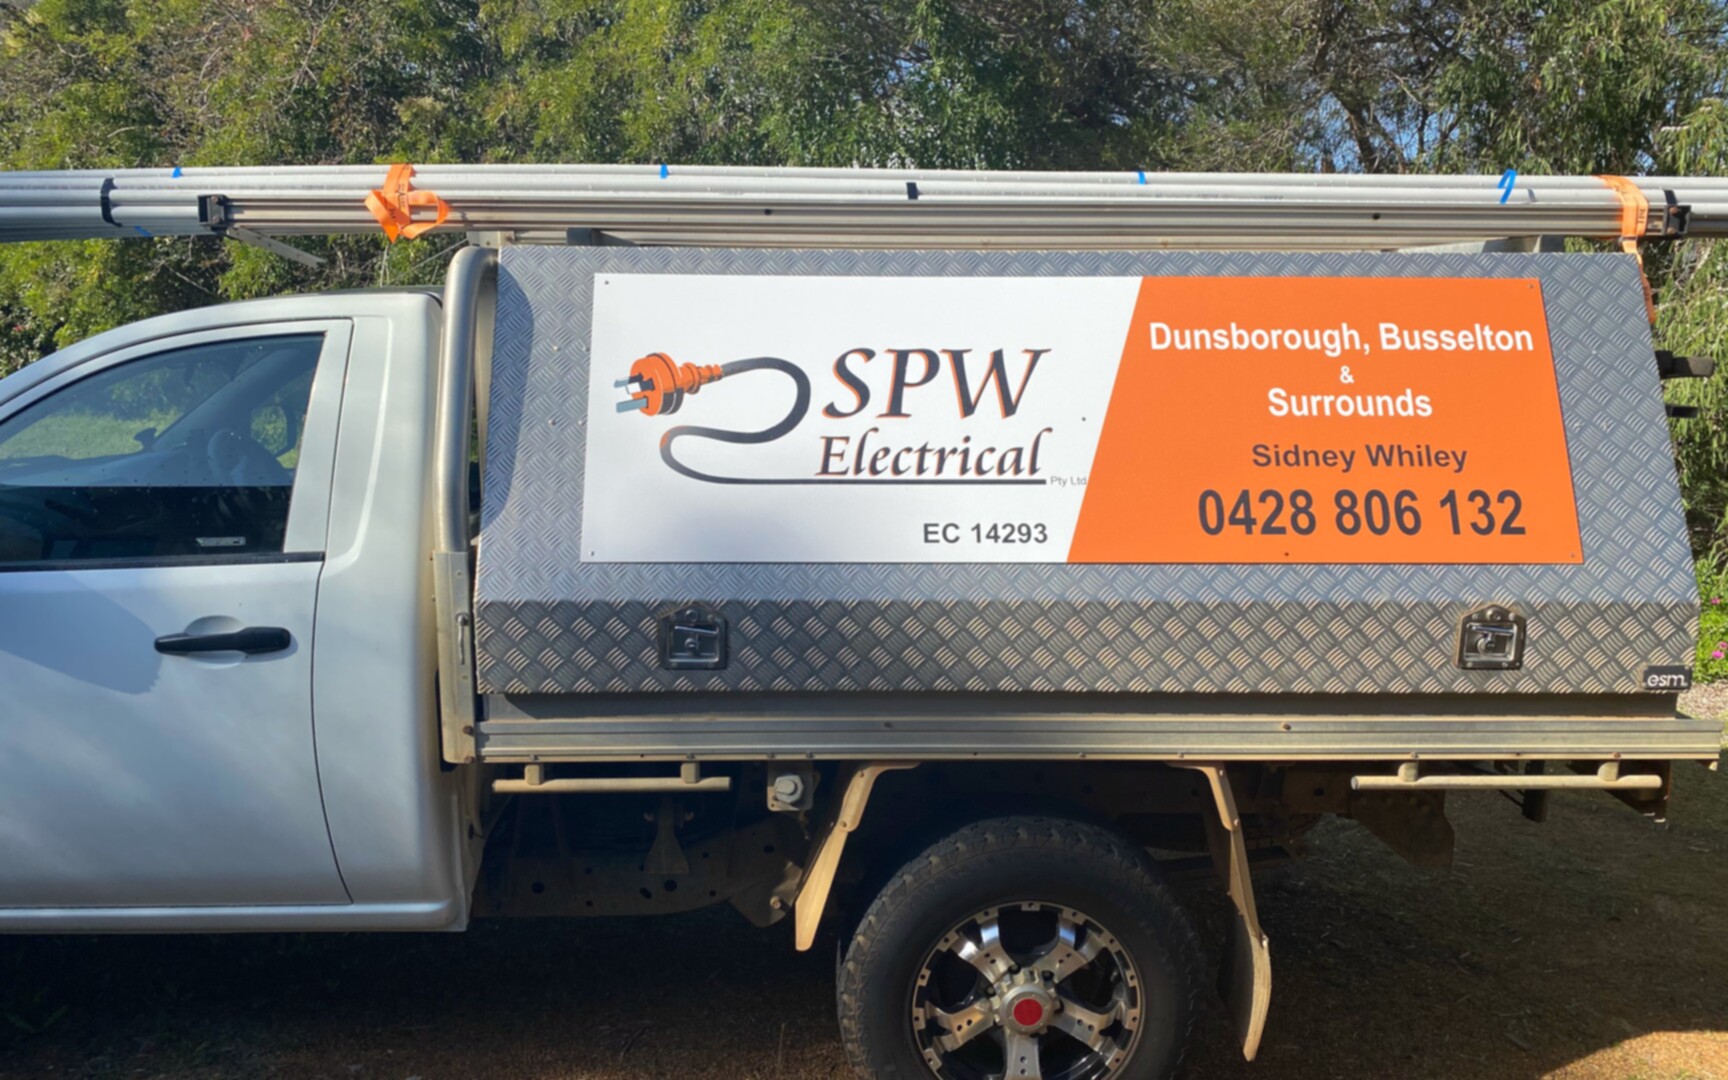 SPW Electrical